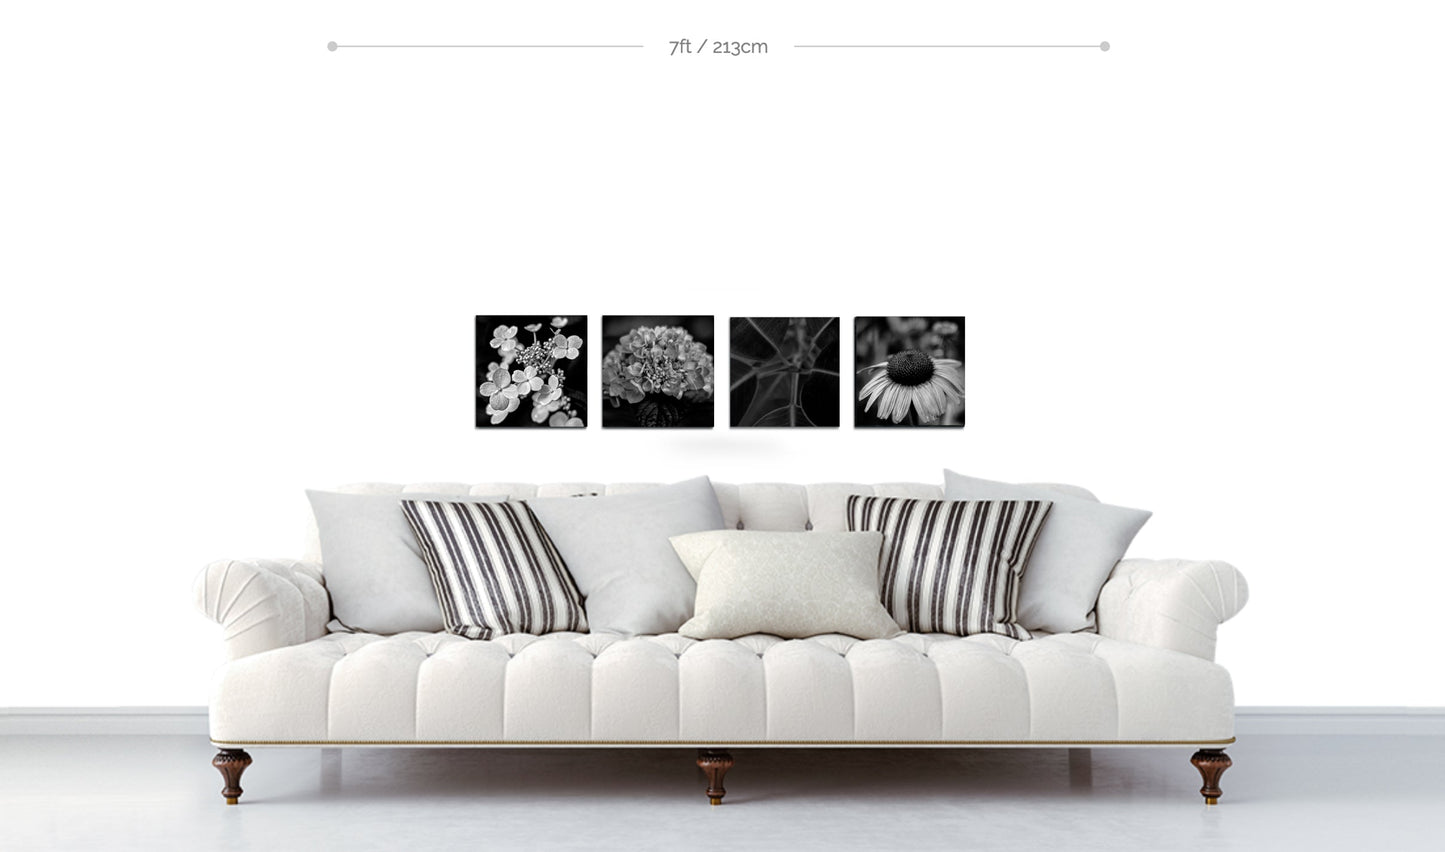 Flower wall decor example four square metal botanical prints arranged in horizontal line above white sofa